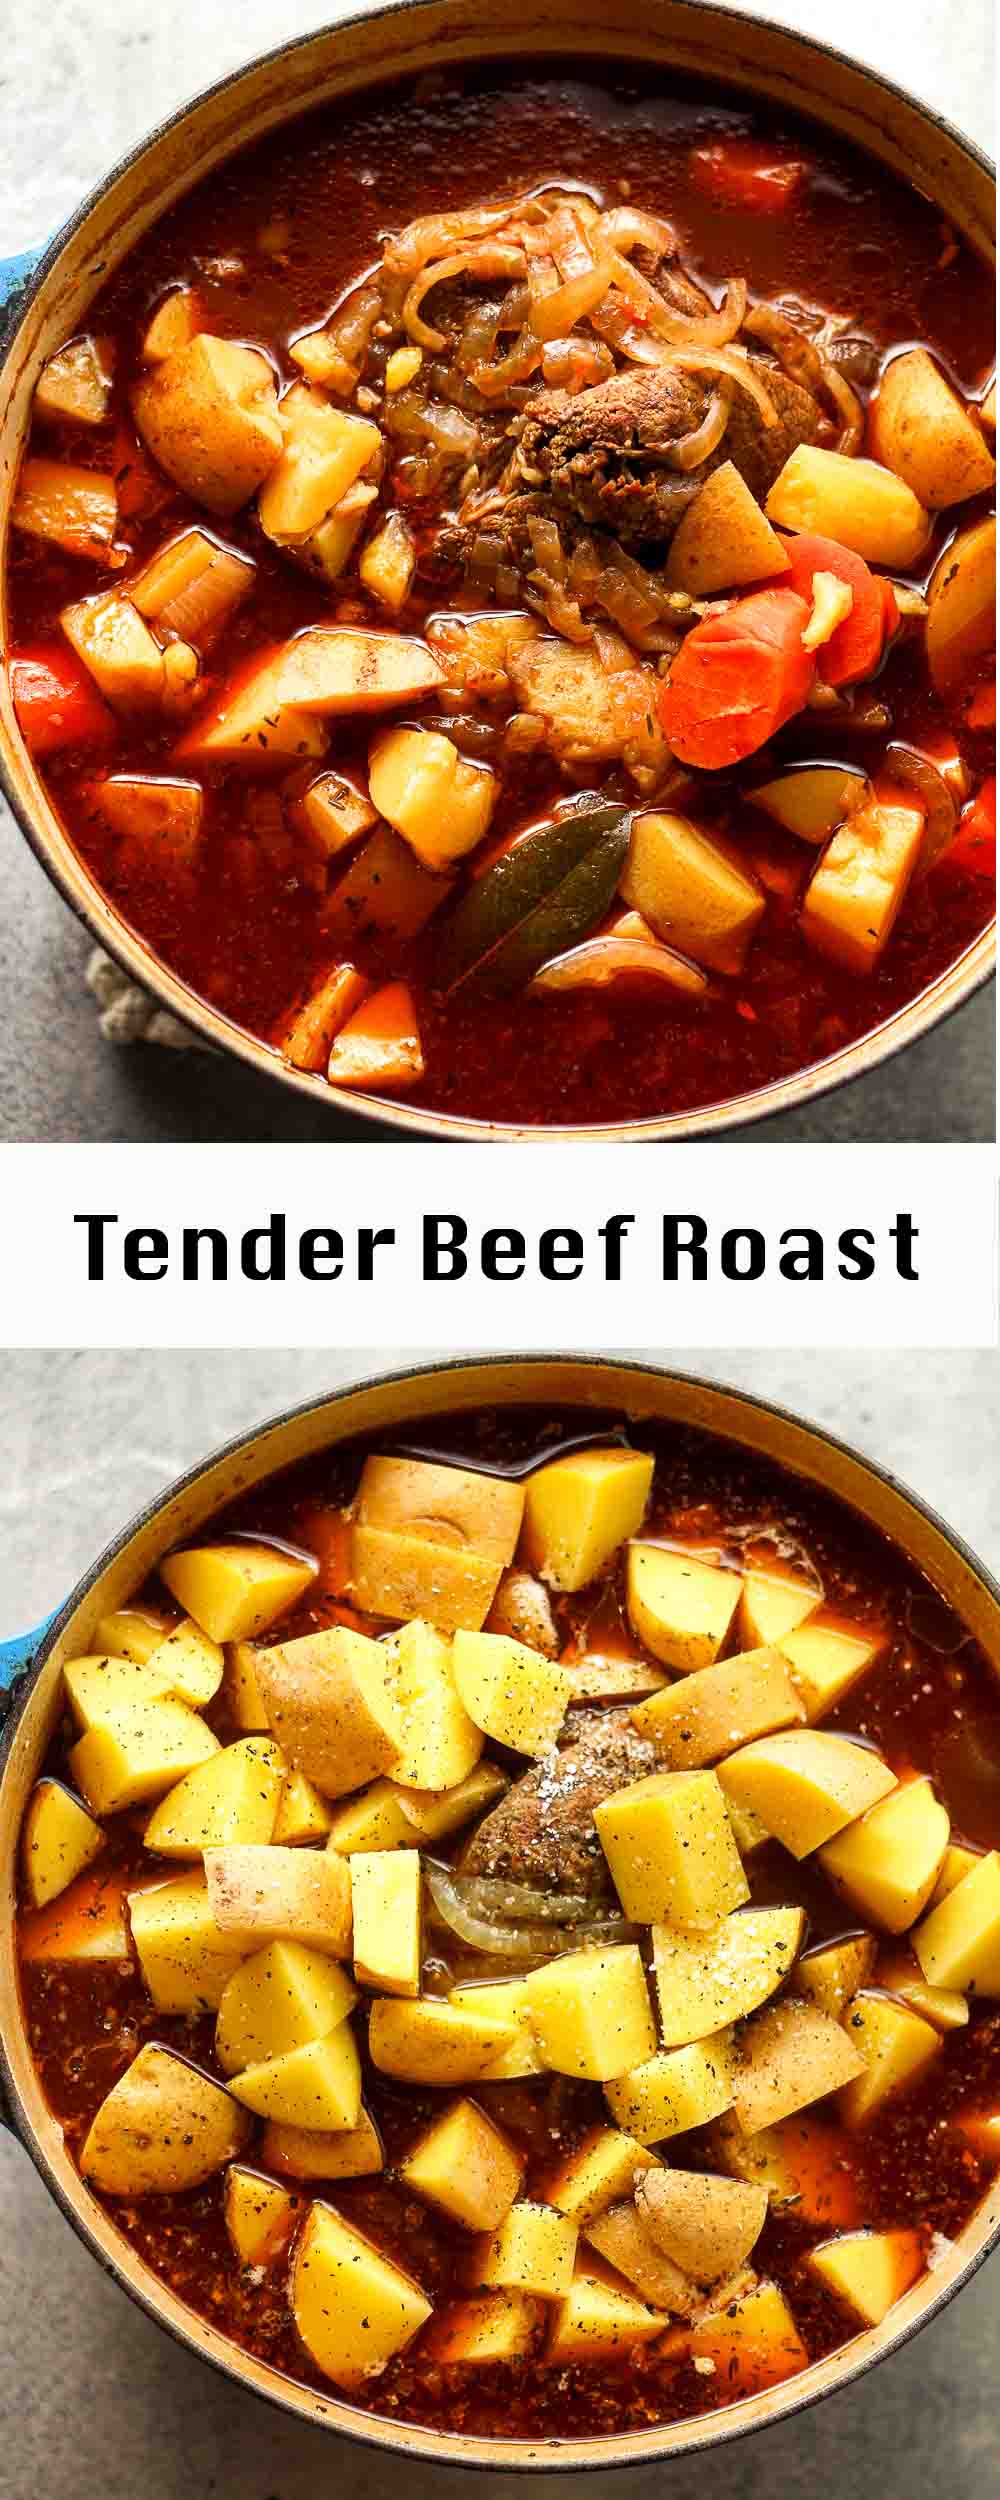 Two photos of the tender beef roast in a dutch oven.